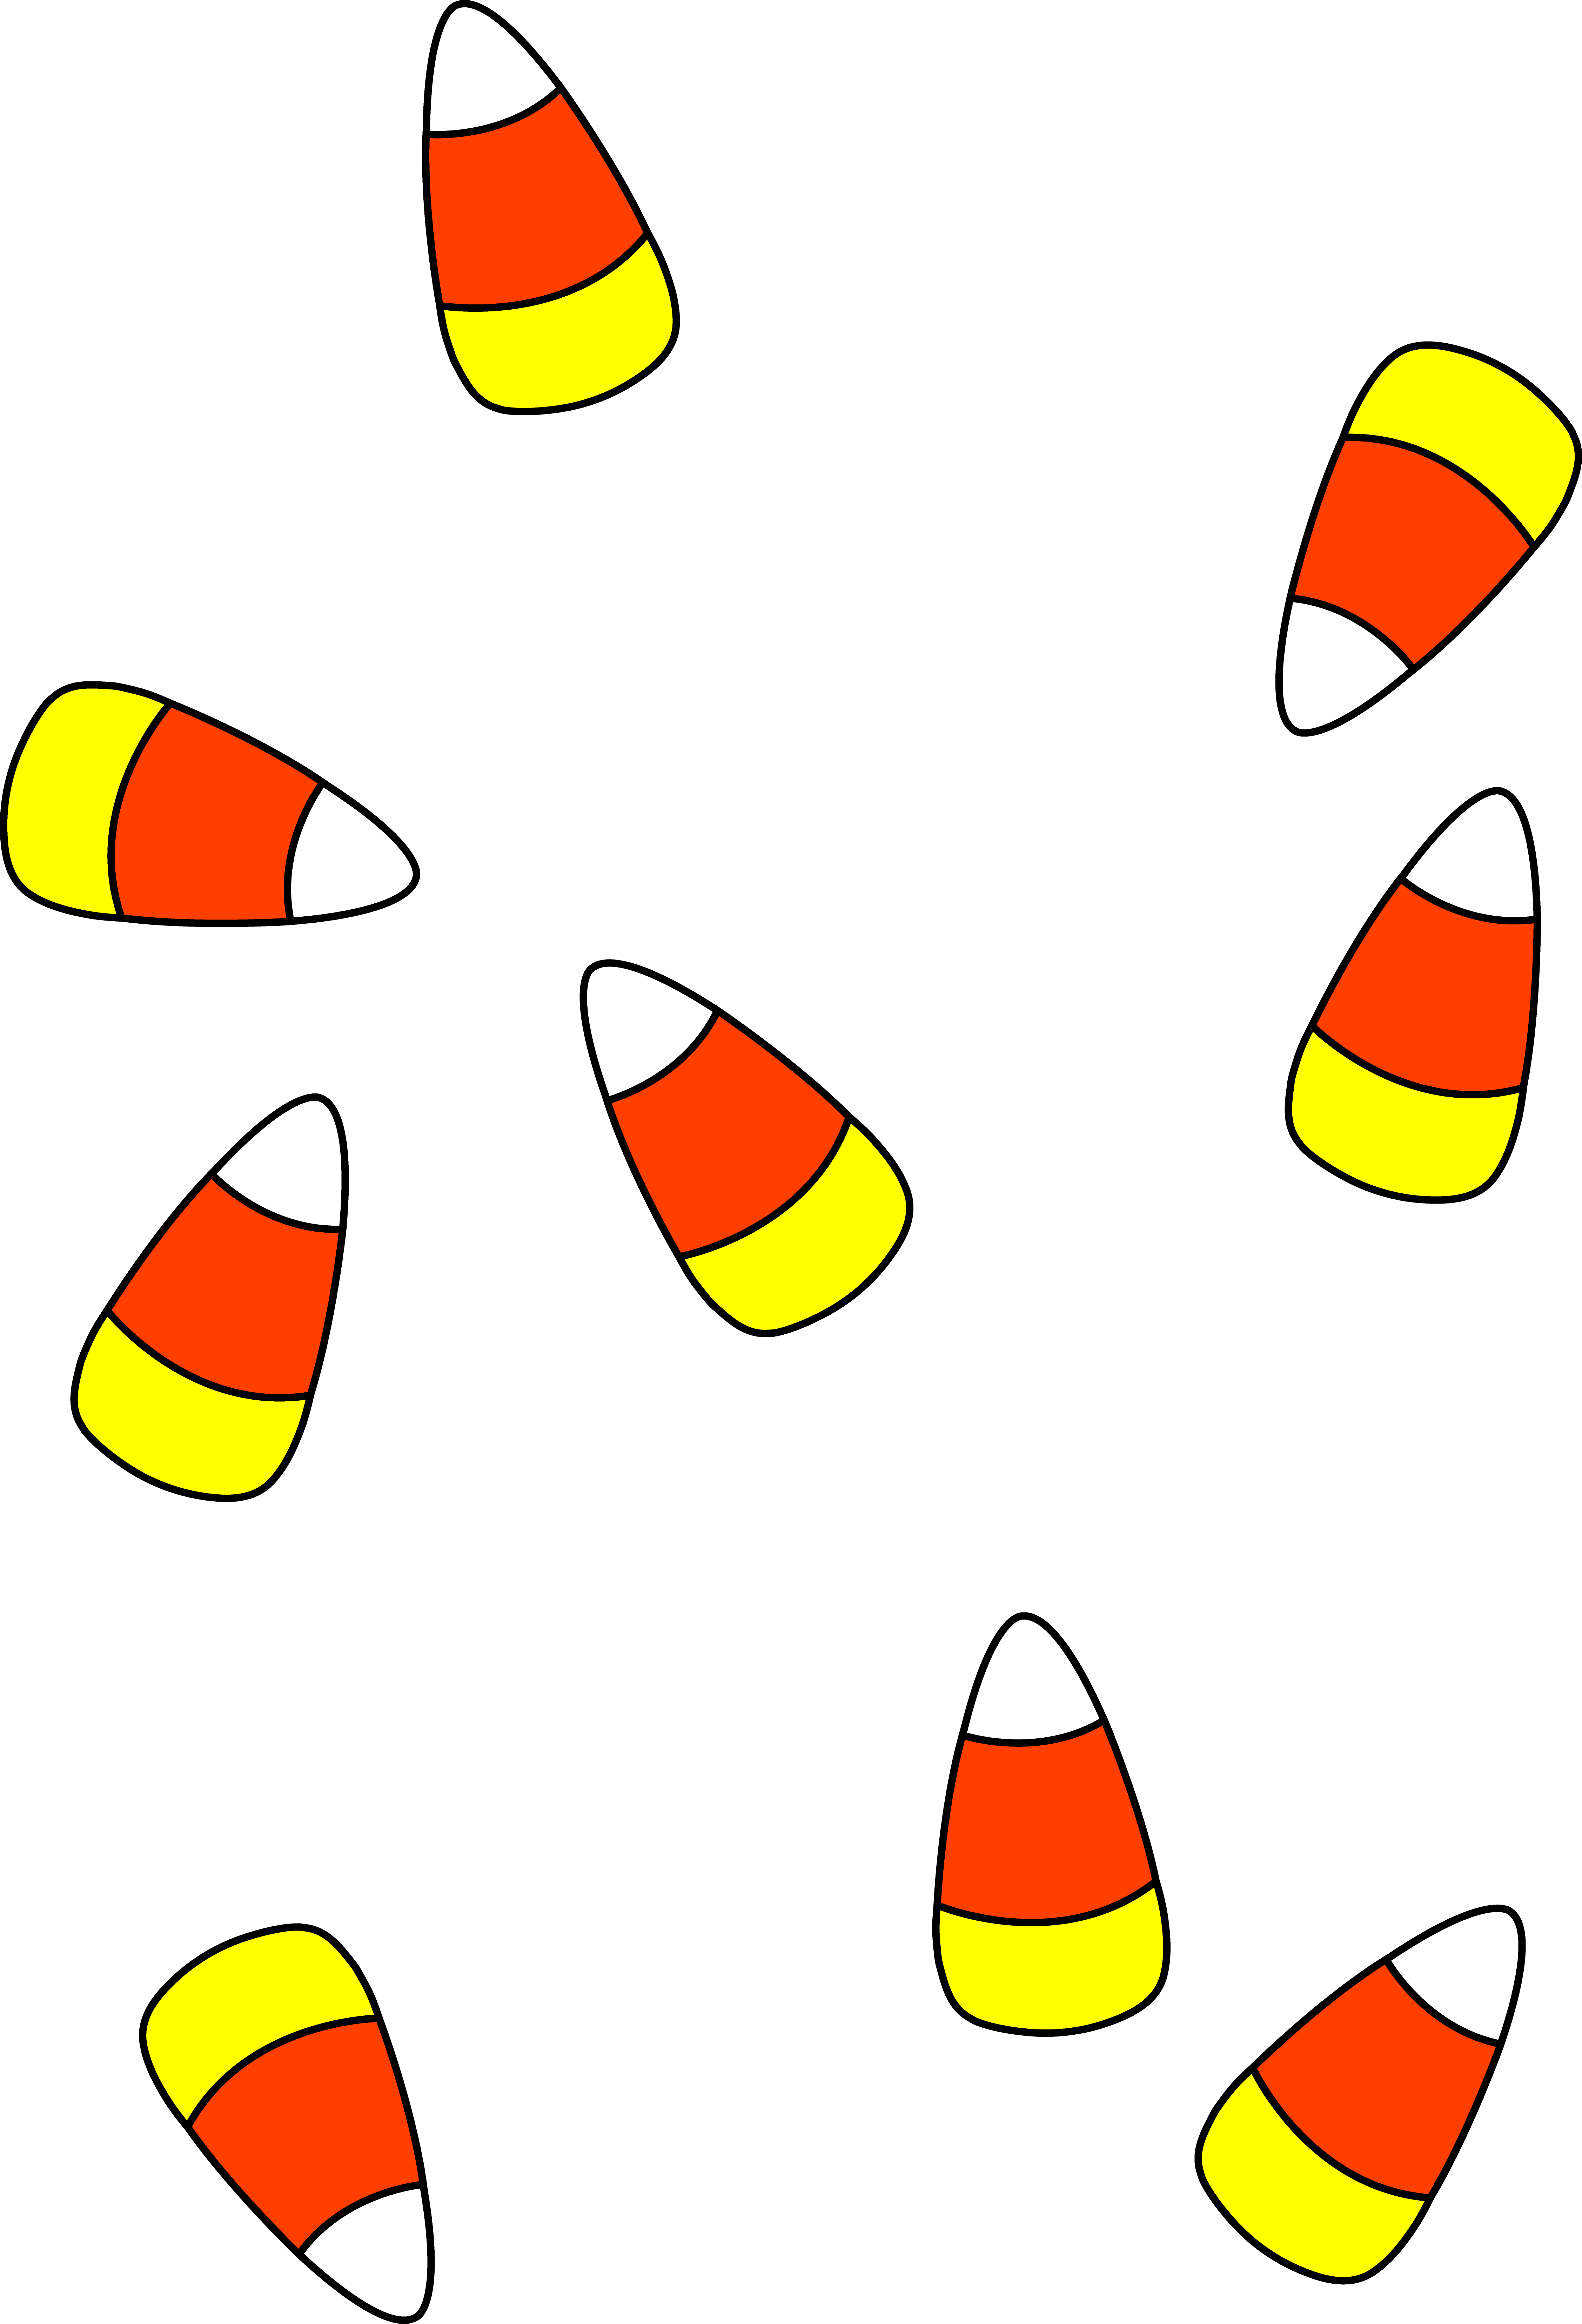 Free Candy Corn Image, Download Free Clip Art, Free Clip